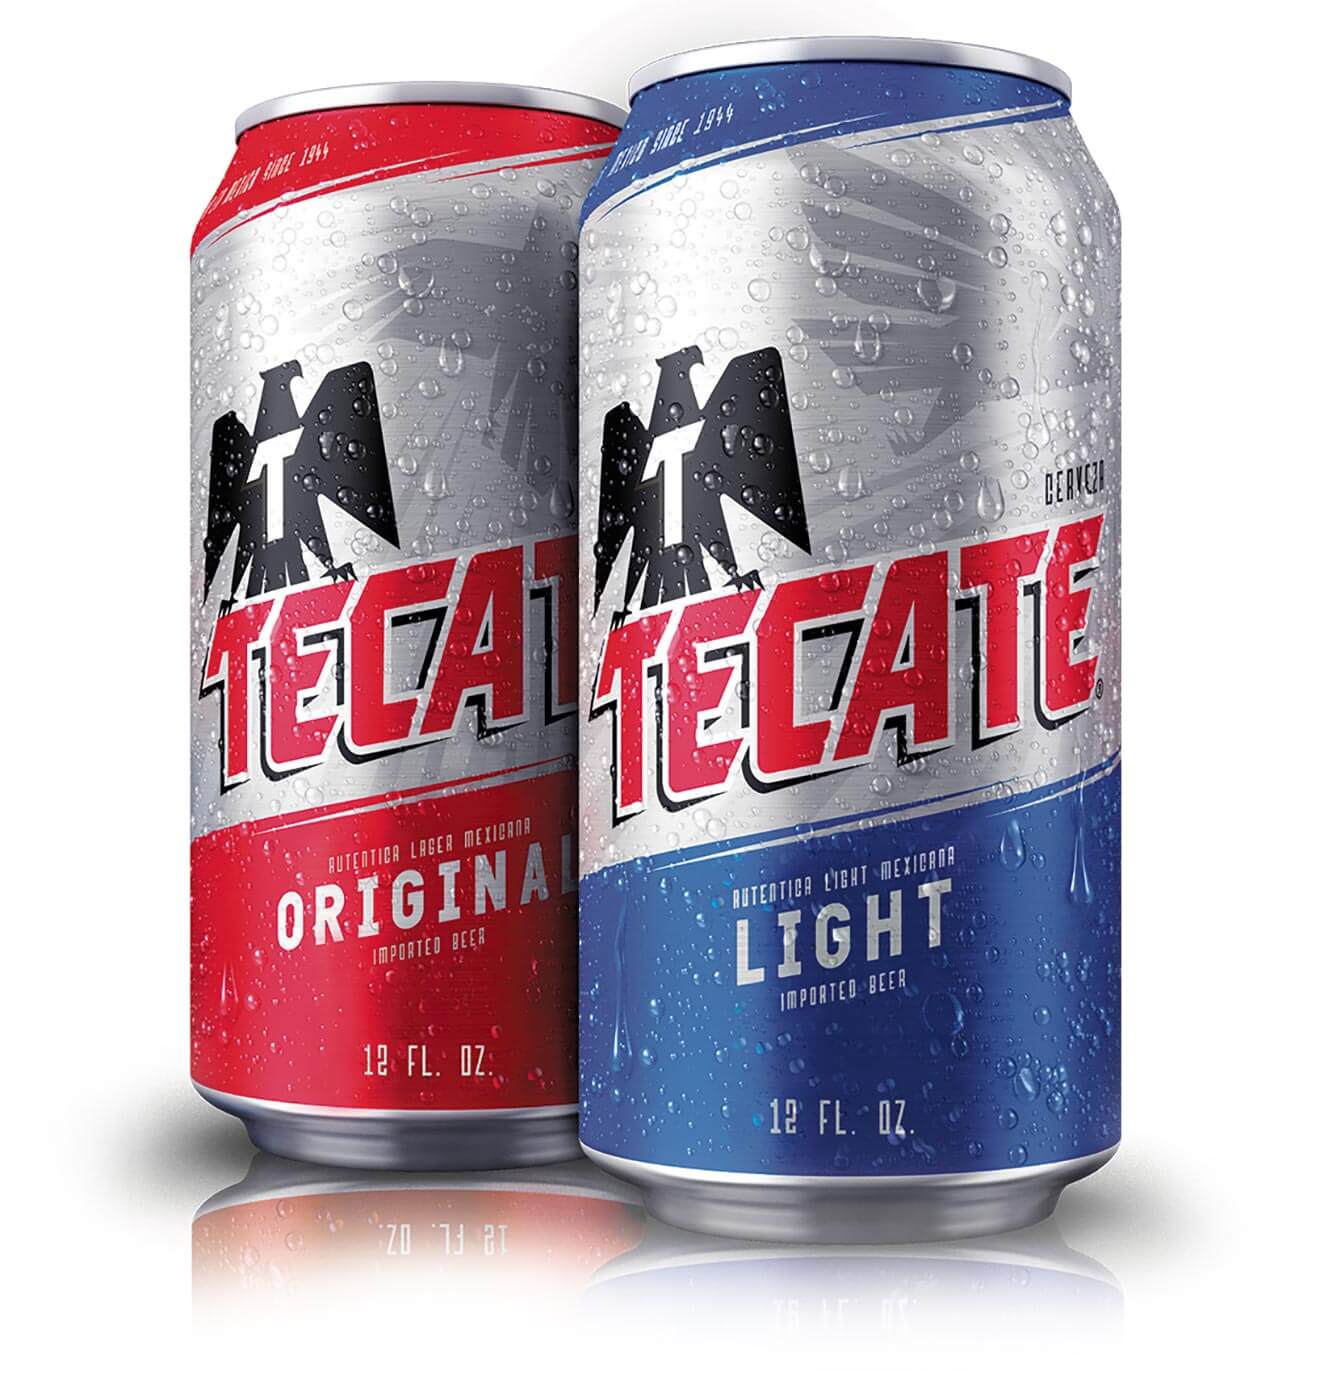 Tecate and Tecate Light cans